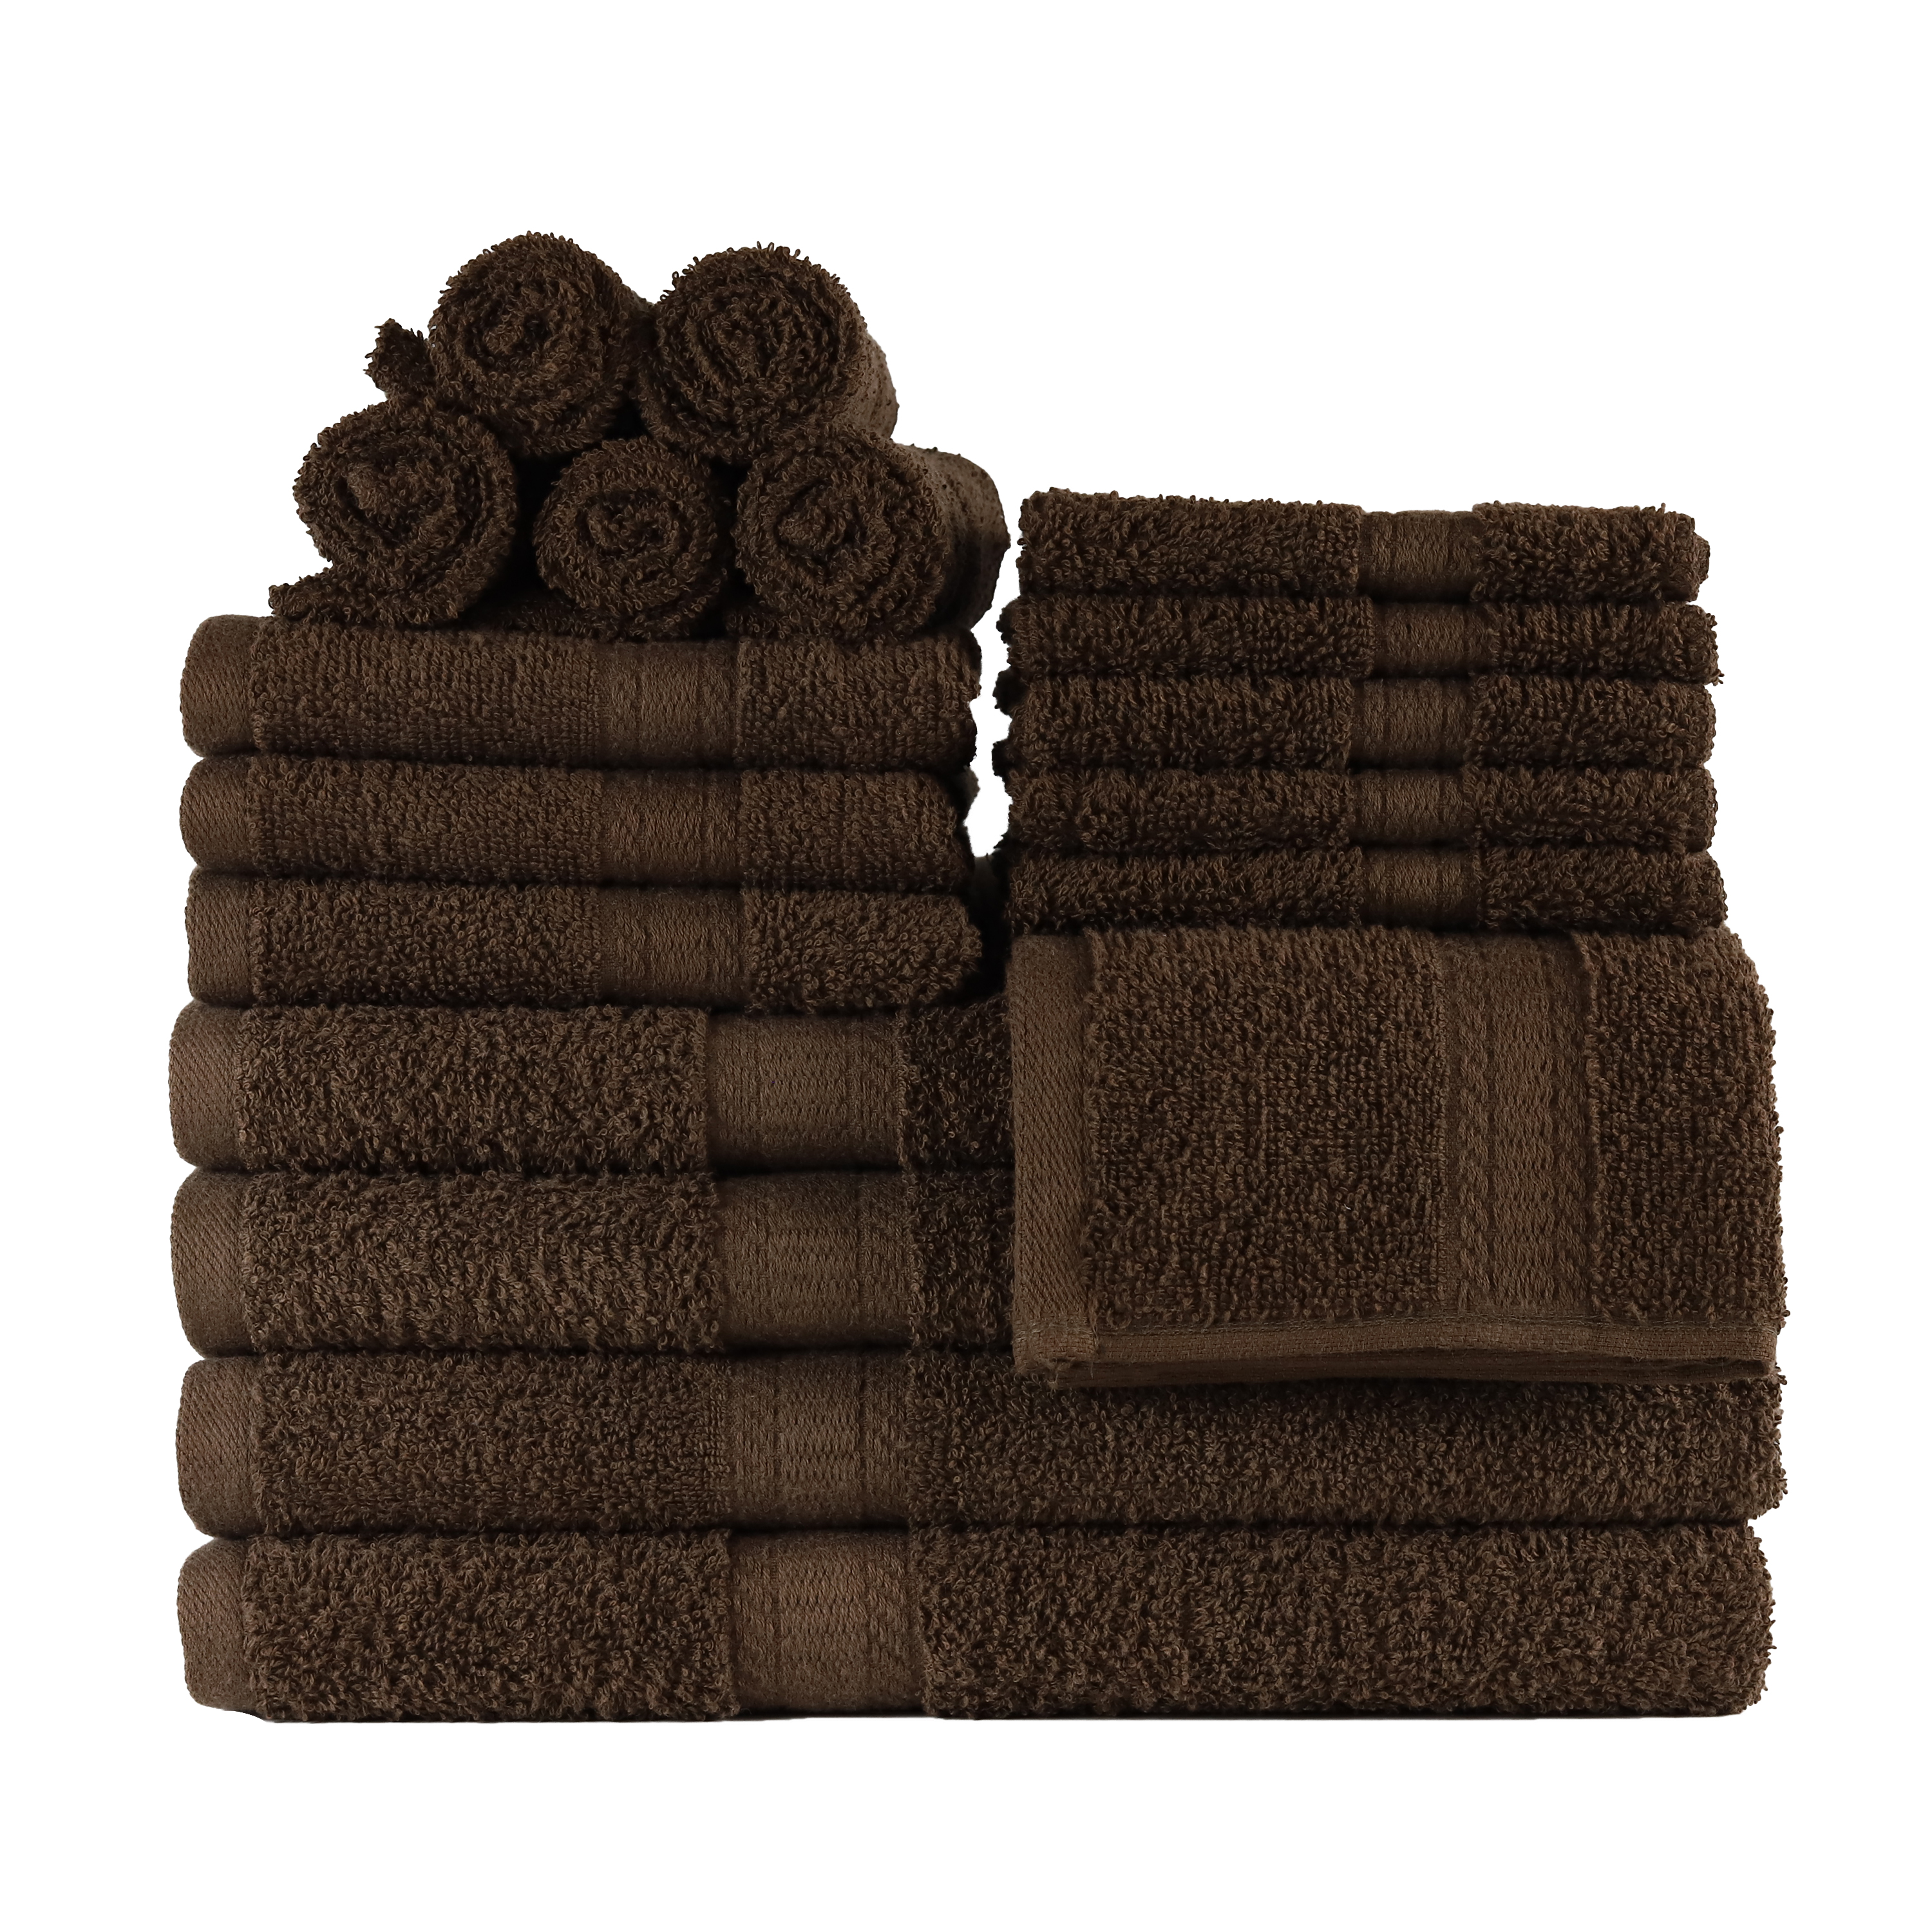 Mainstays Basic Solid 18-Piece Bath Towel Set Collection, Brown - image 1 of 10